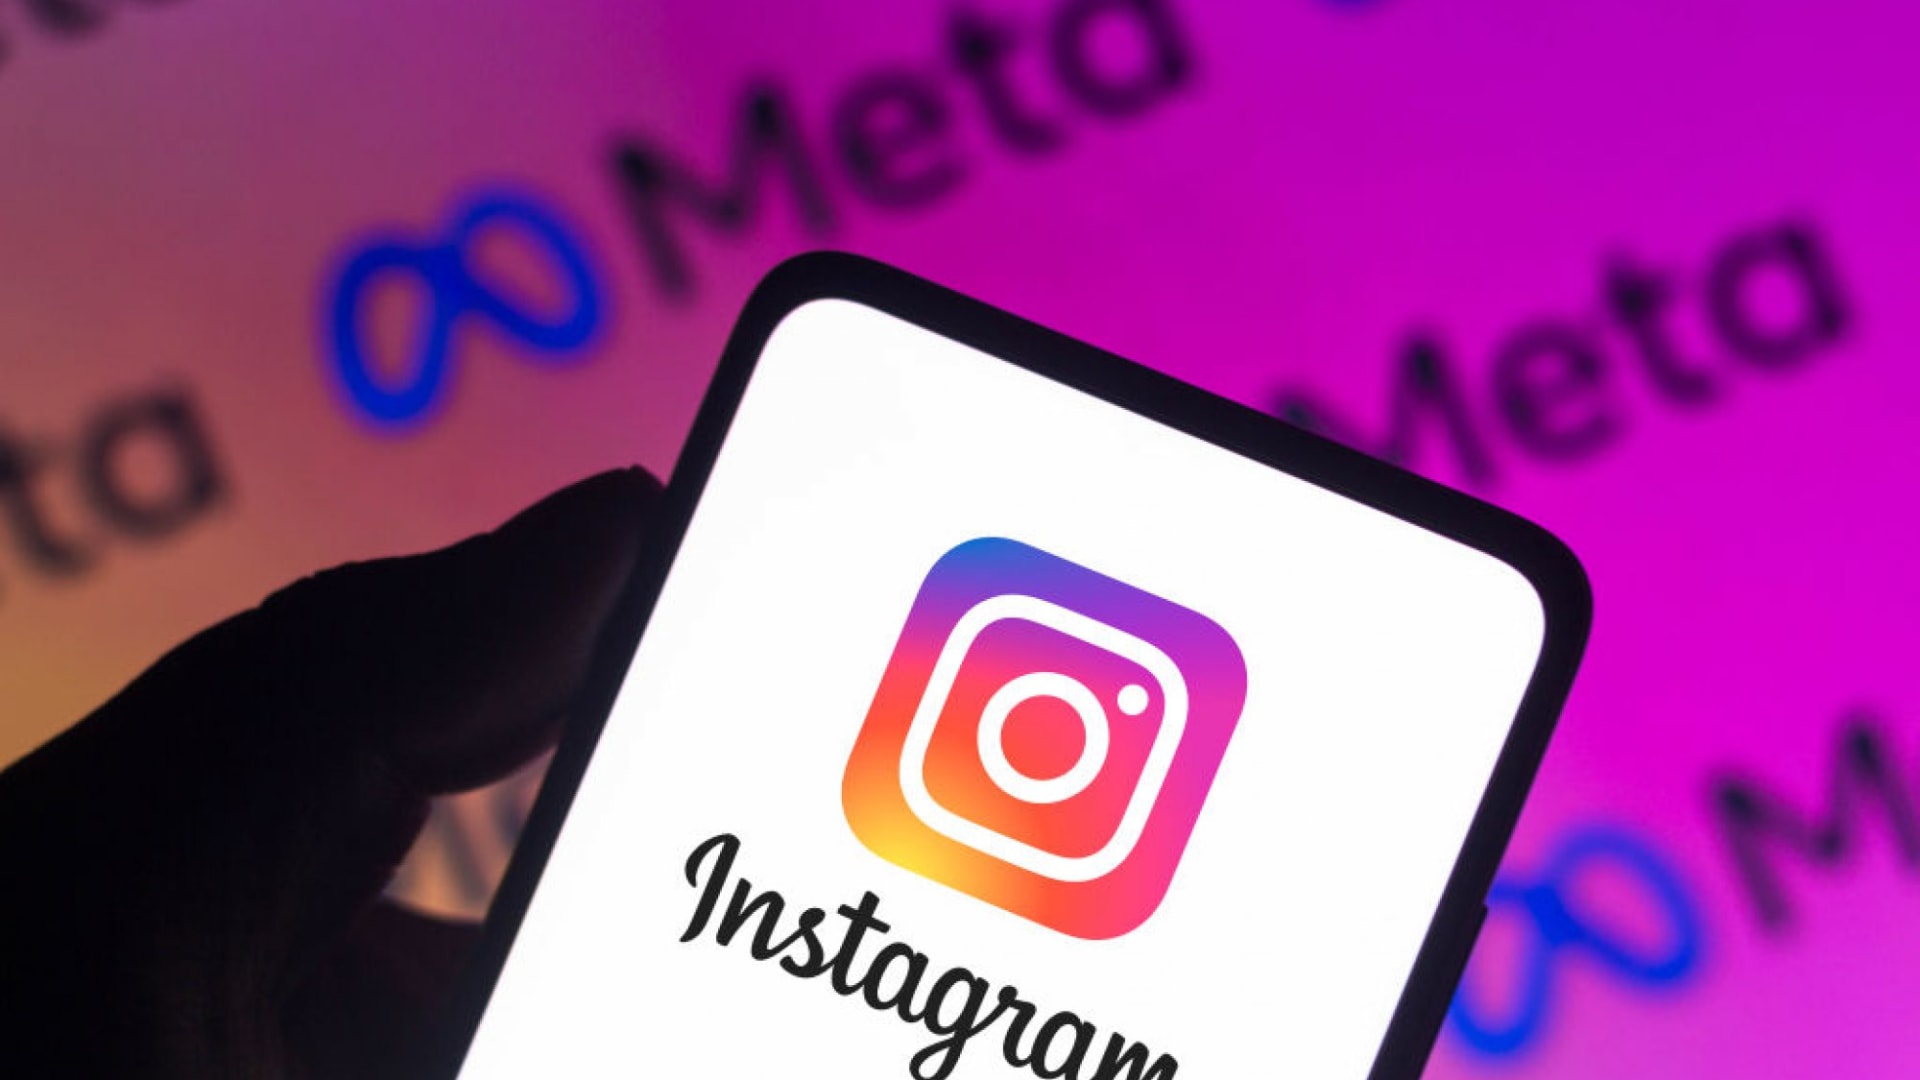 Build your firm or brand with more Instagram followers